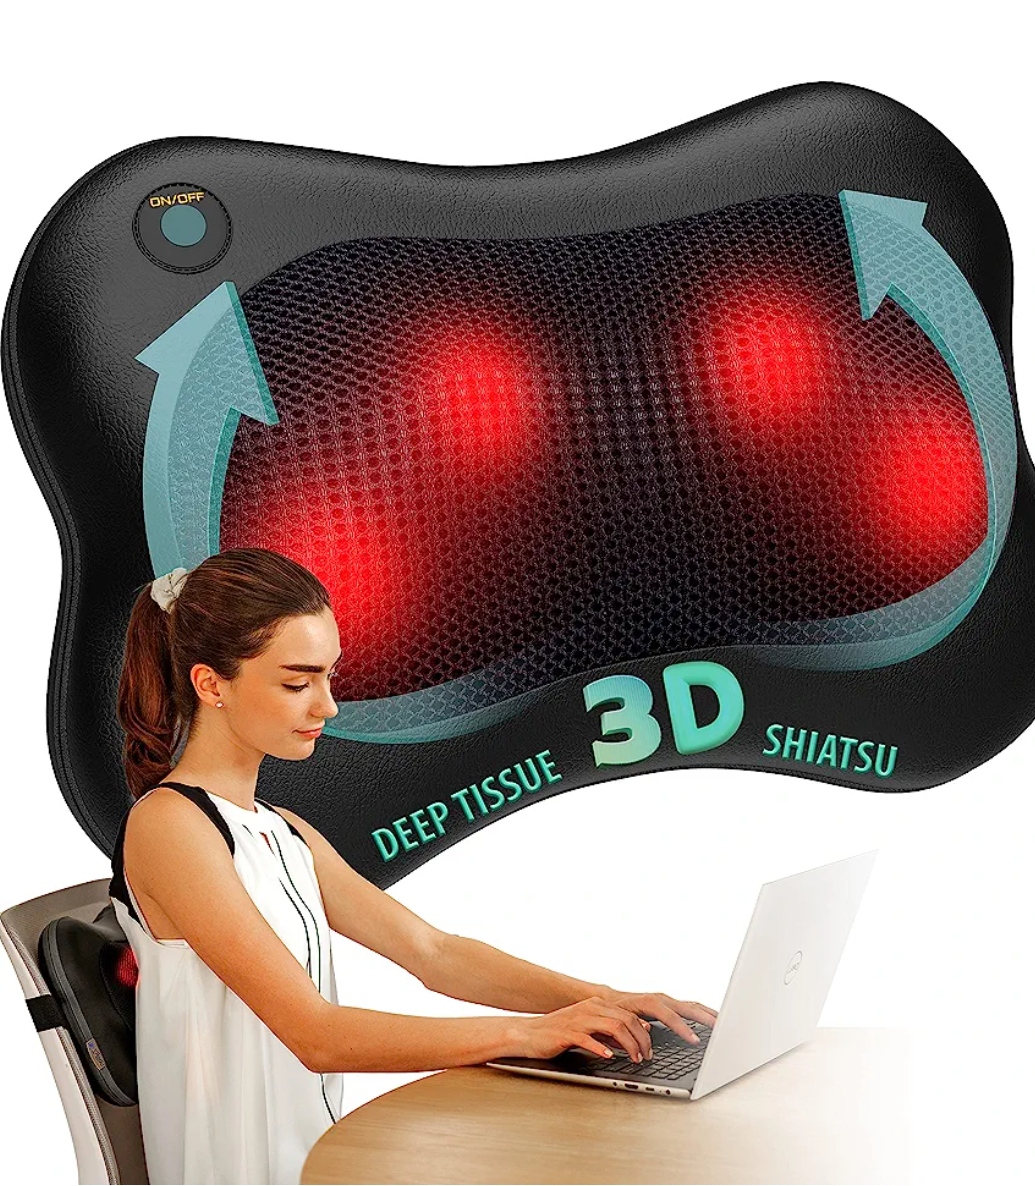 zyllion shiatsu back and neck massager-3d deep tissue kneading massage pillow with heat best christmas gift for a lady under $100